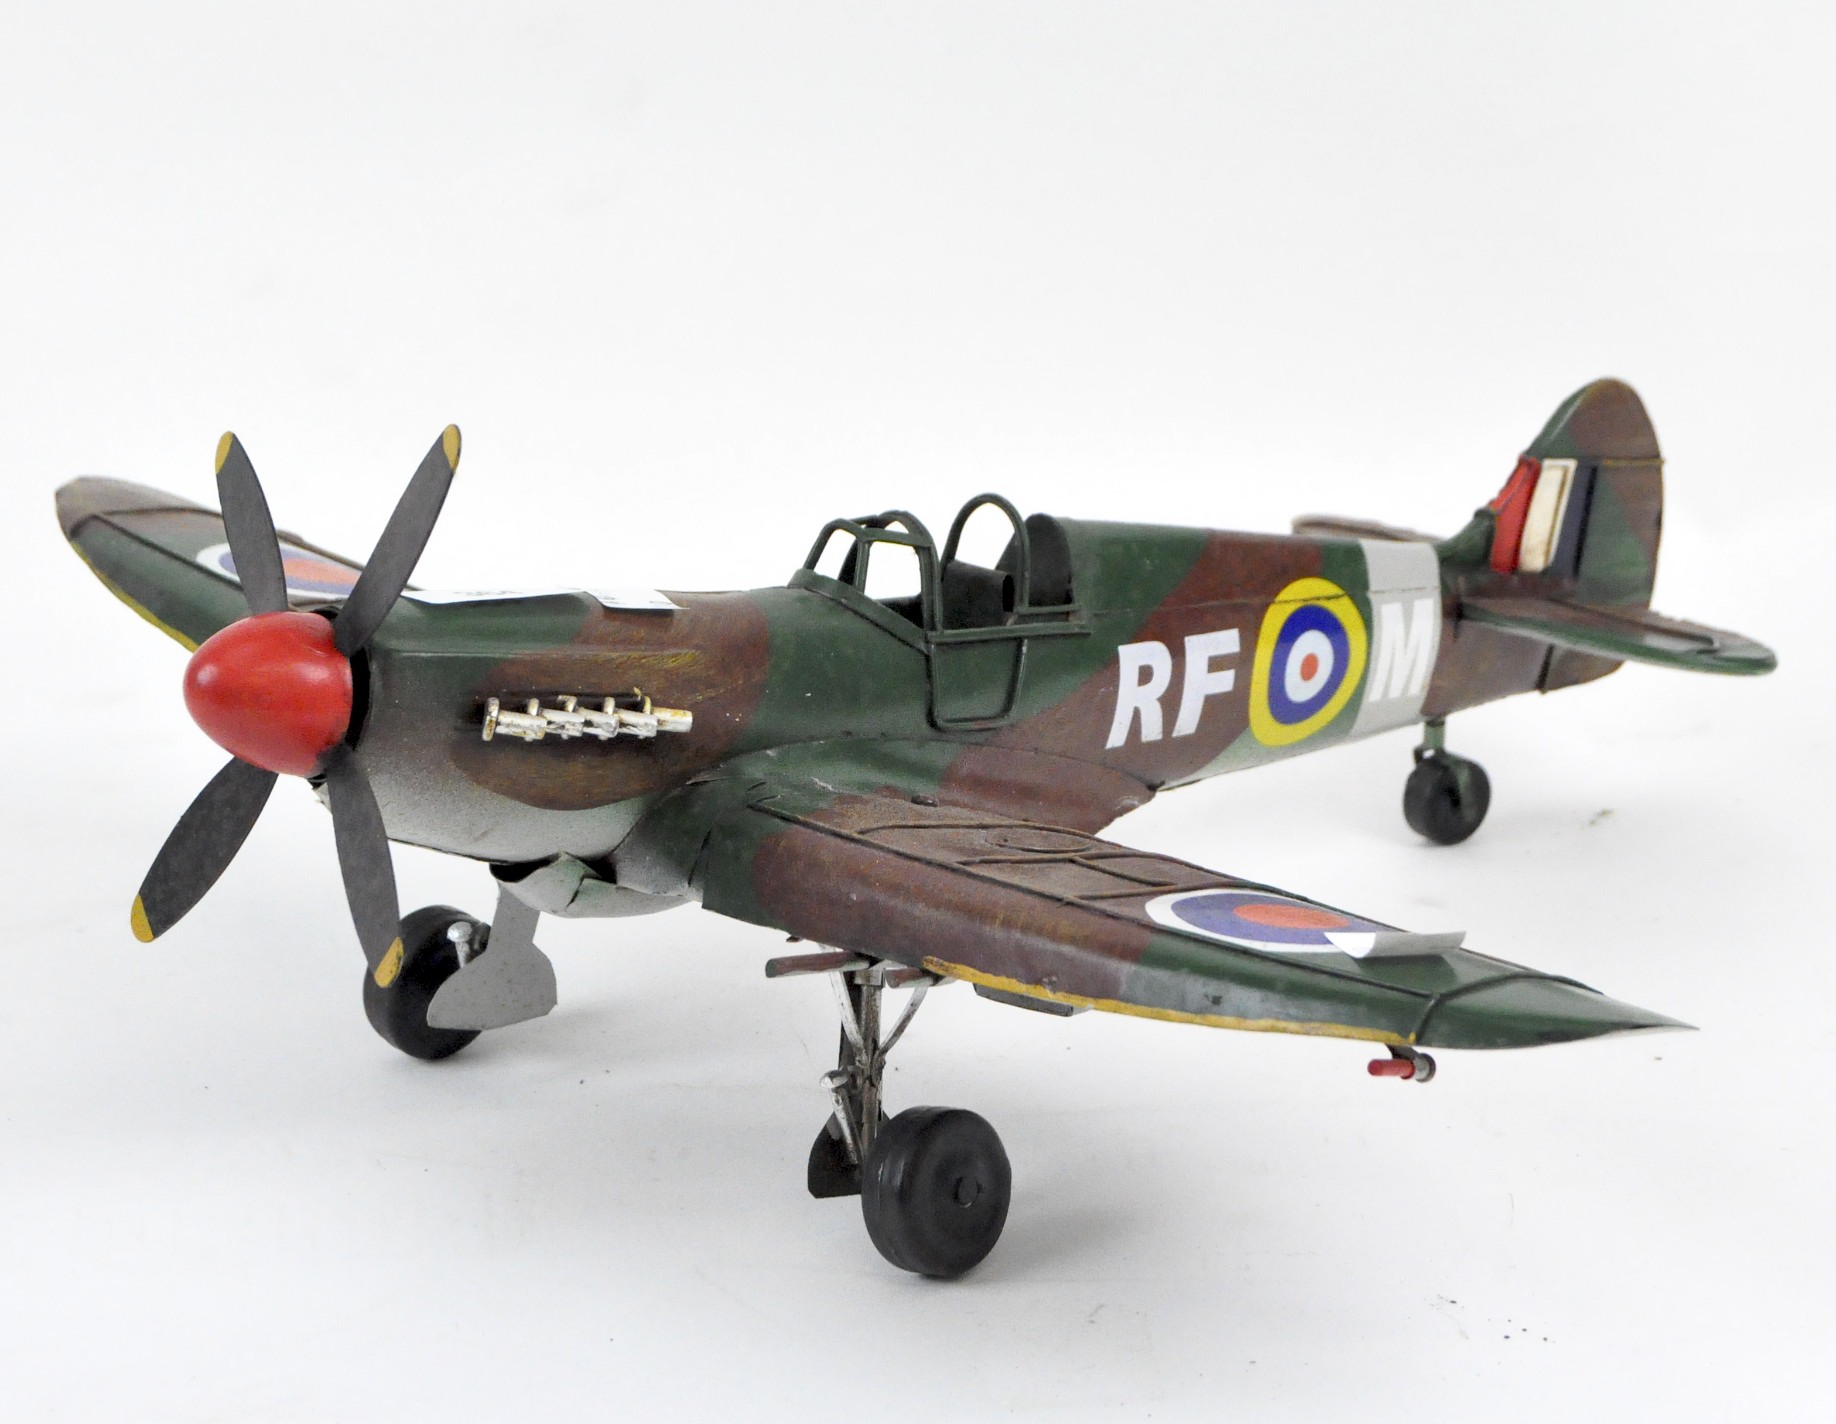 A tinplate model of a spitfire, handpainted with wheels and a rotating propeller,